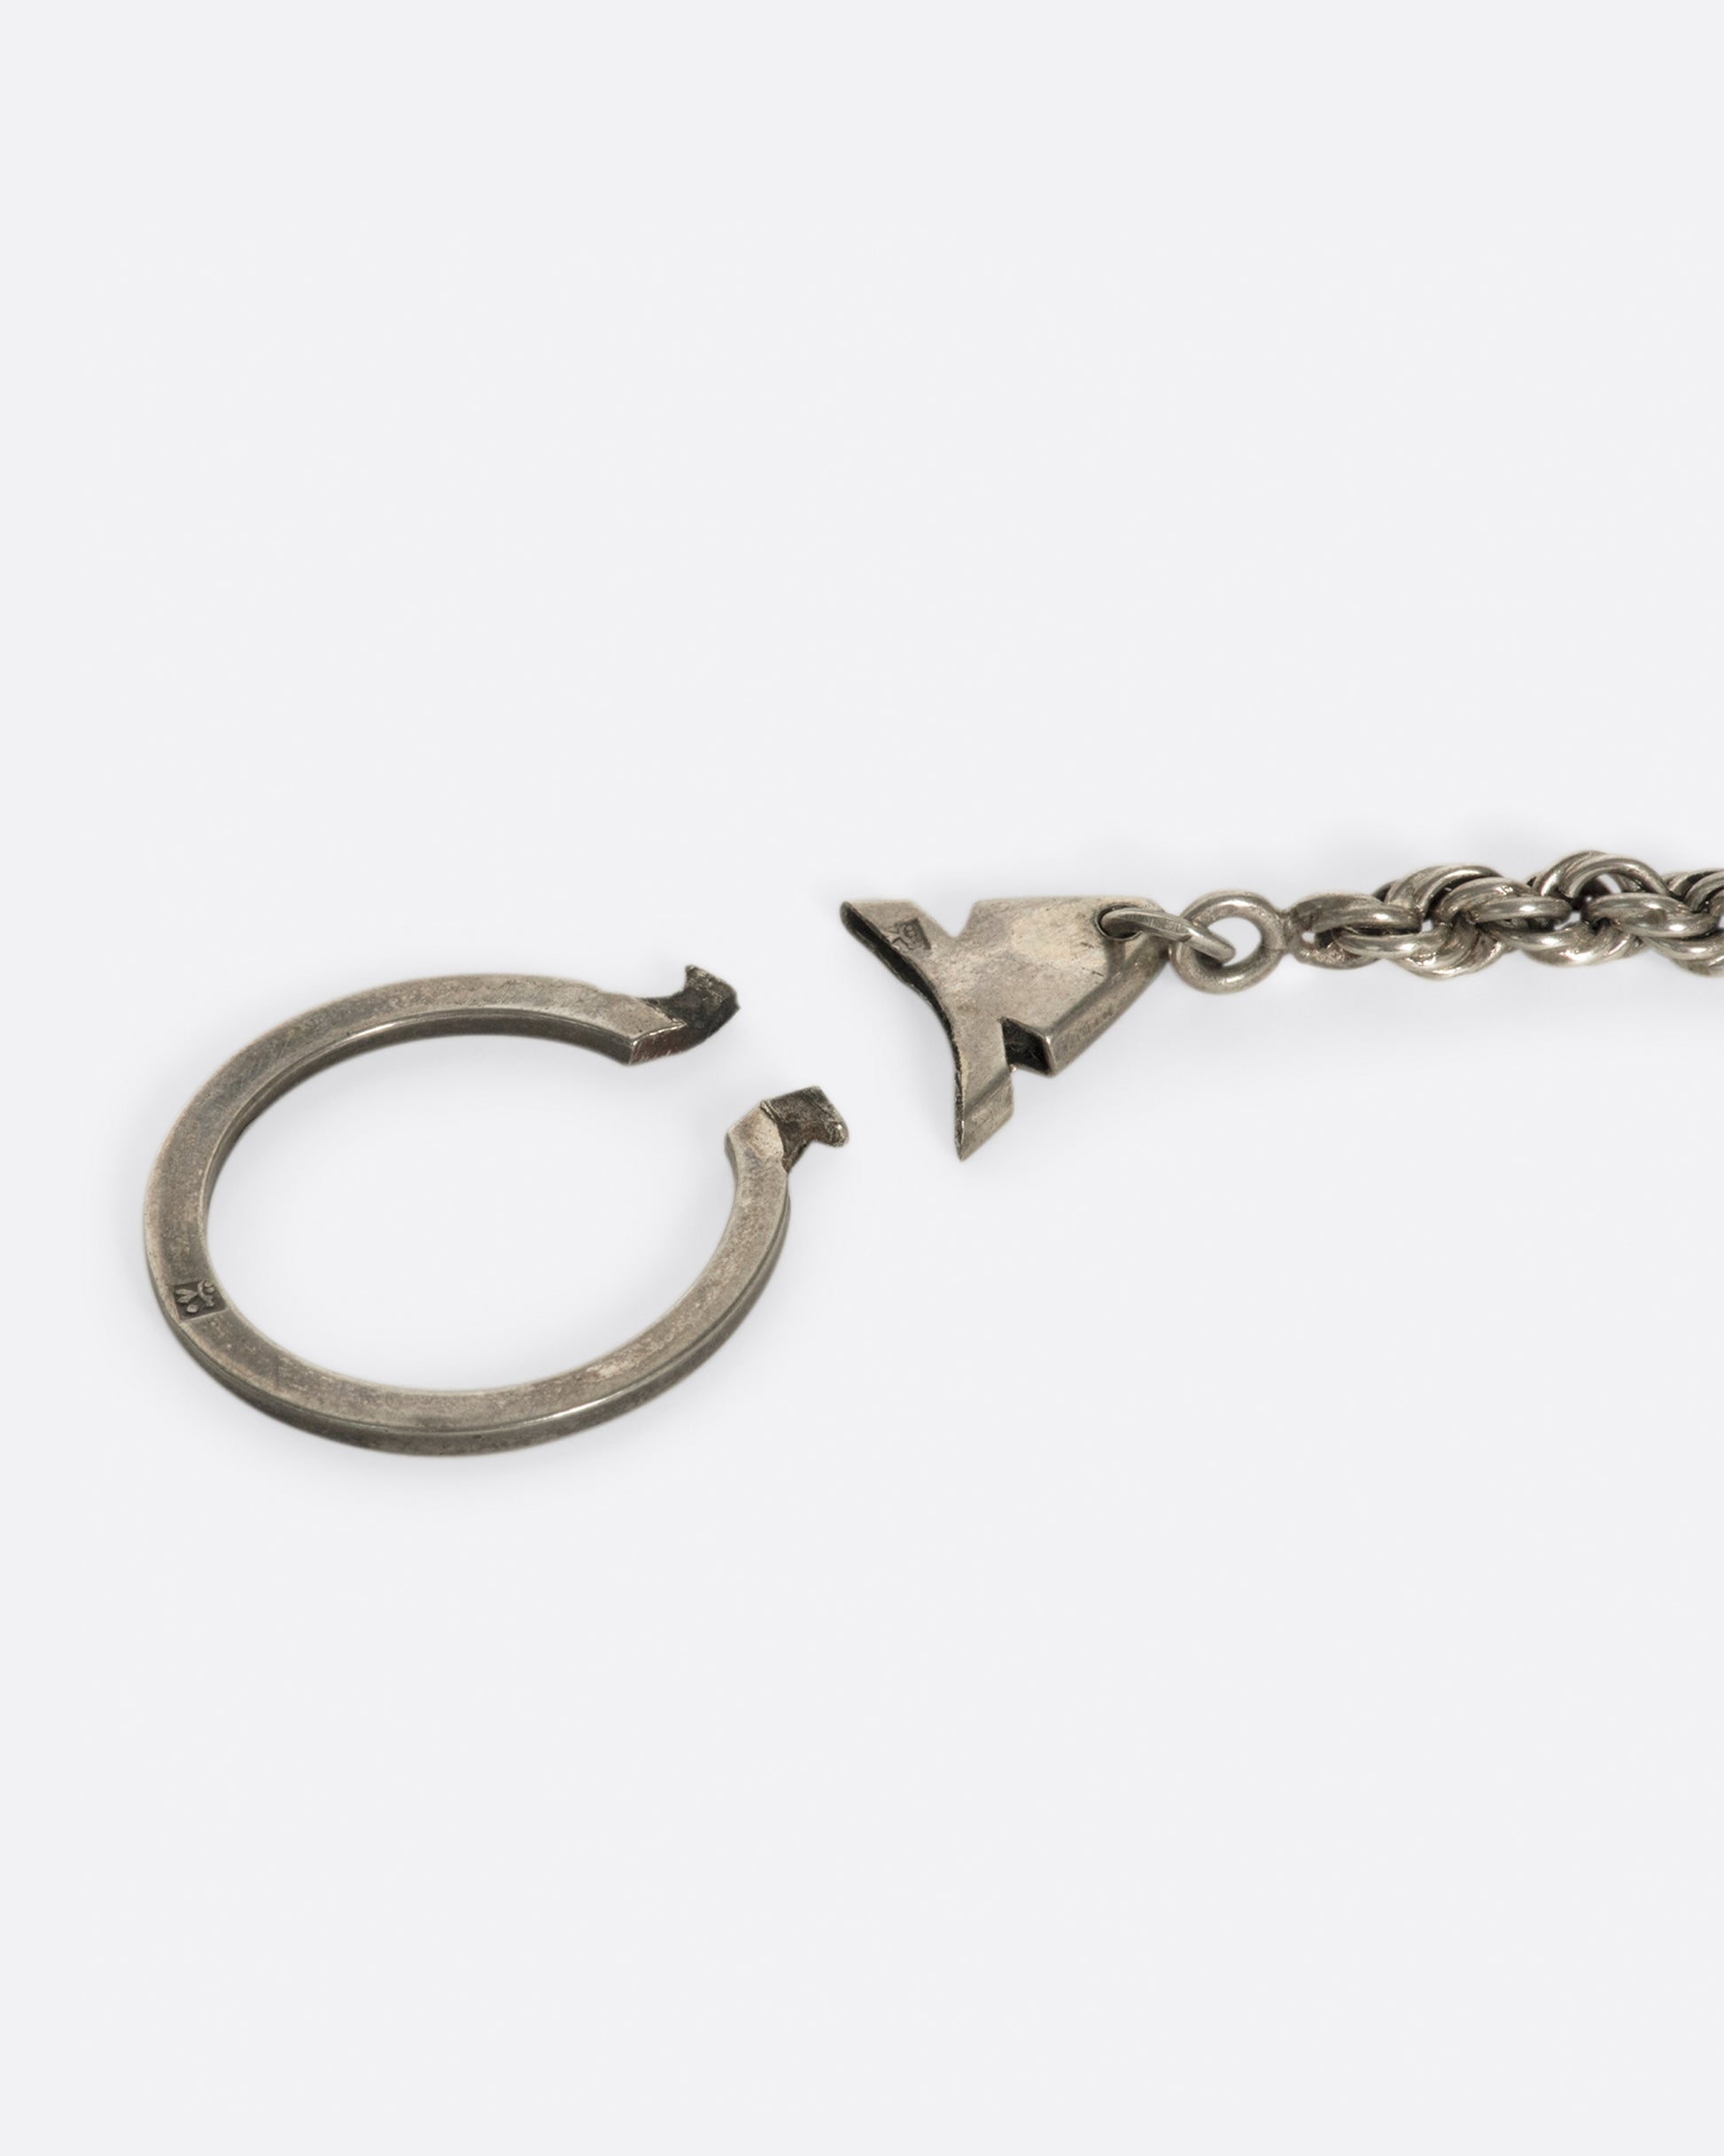 Once a teenage queen of Ancient Egypt, Nefertiti is celebrated for her dedication to the sun god. To open the keyring, pinch close to chain to release the catches.